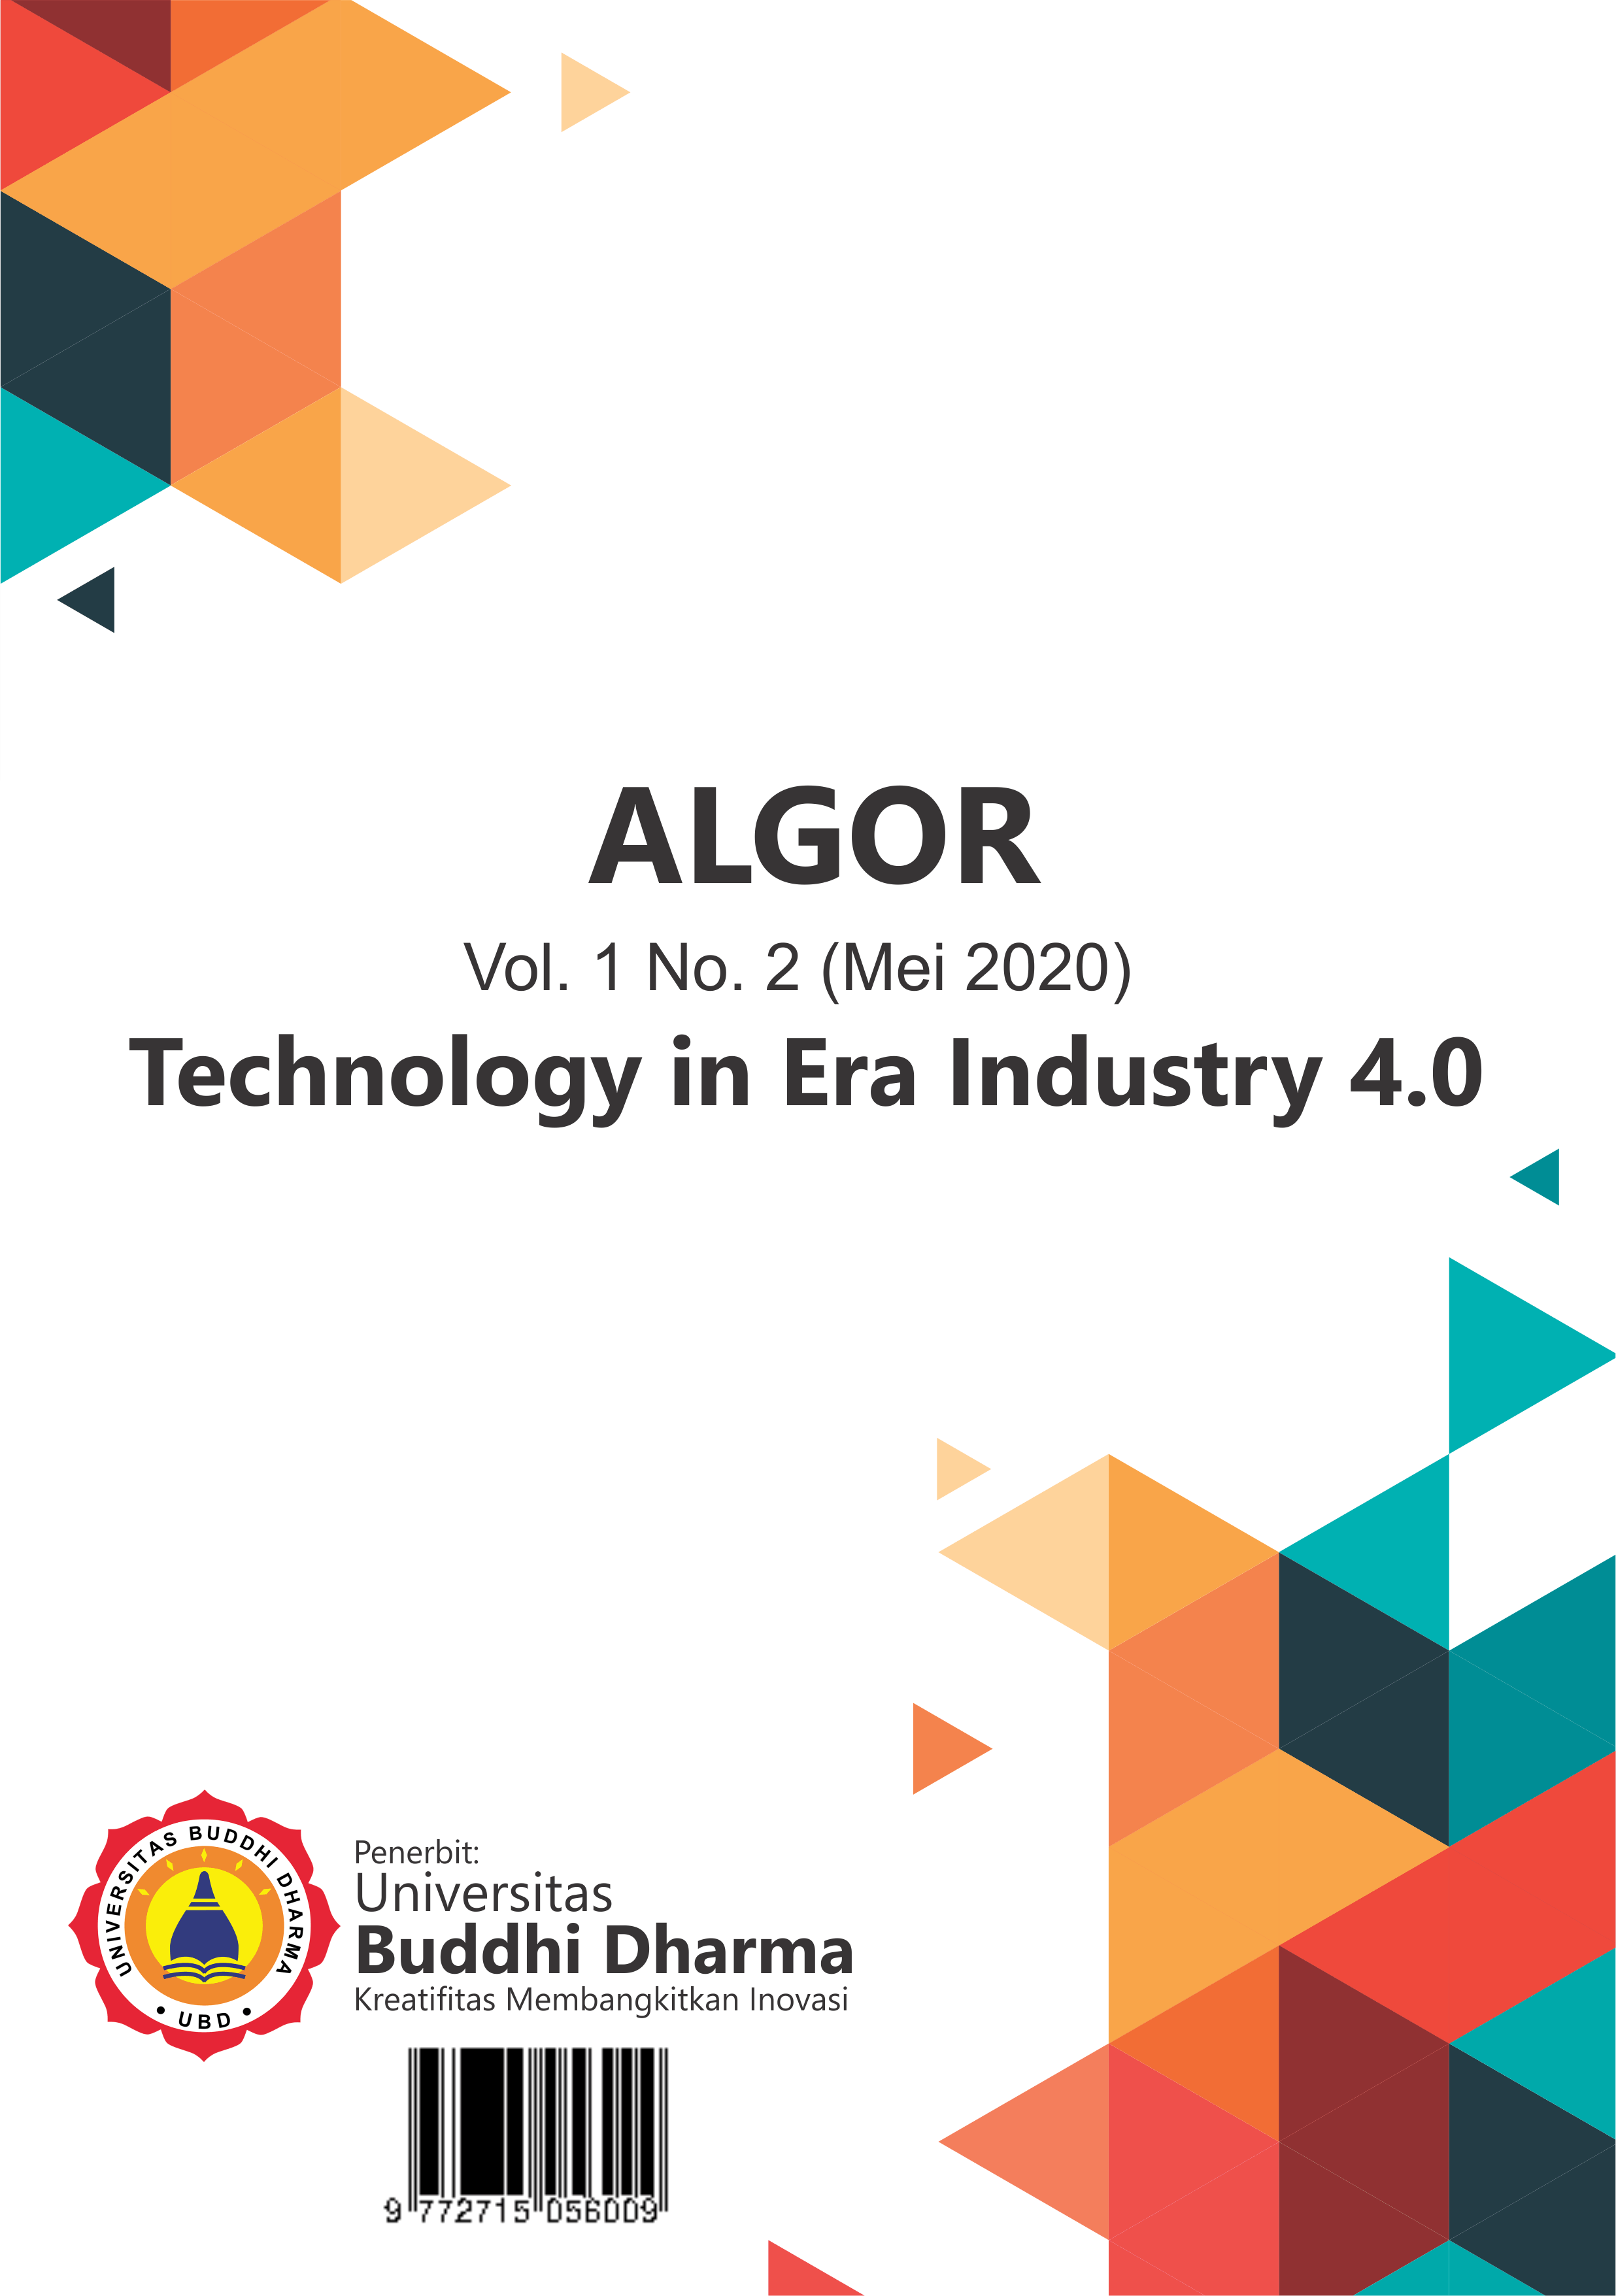 					View Vol. 1 No. 2 (2020): Technology in Era Industry 4.0
				